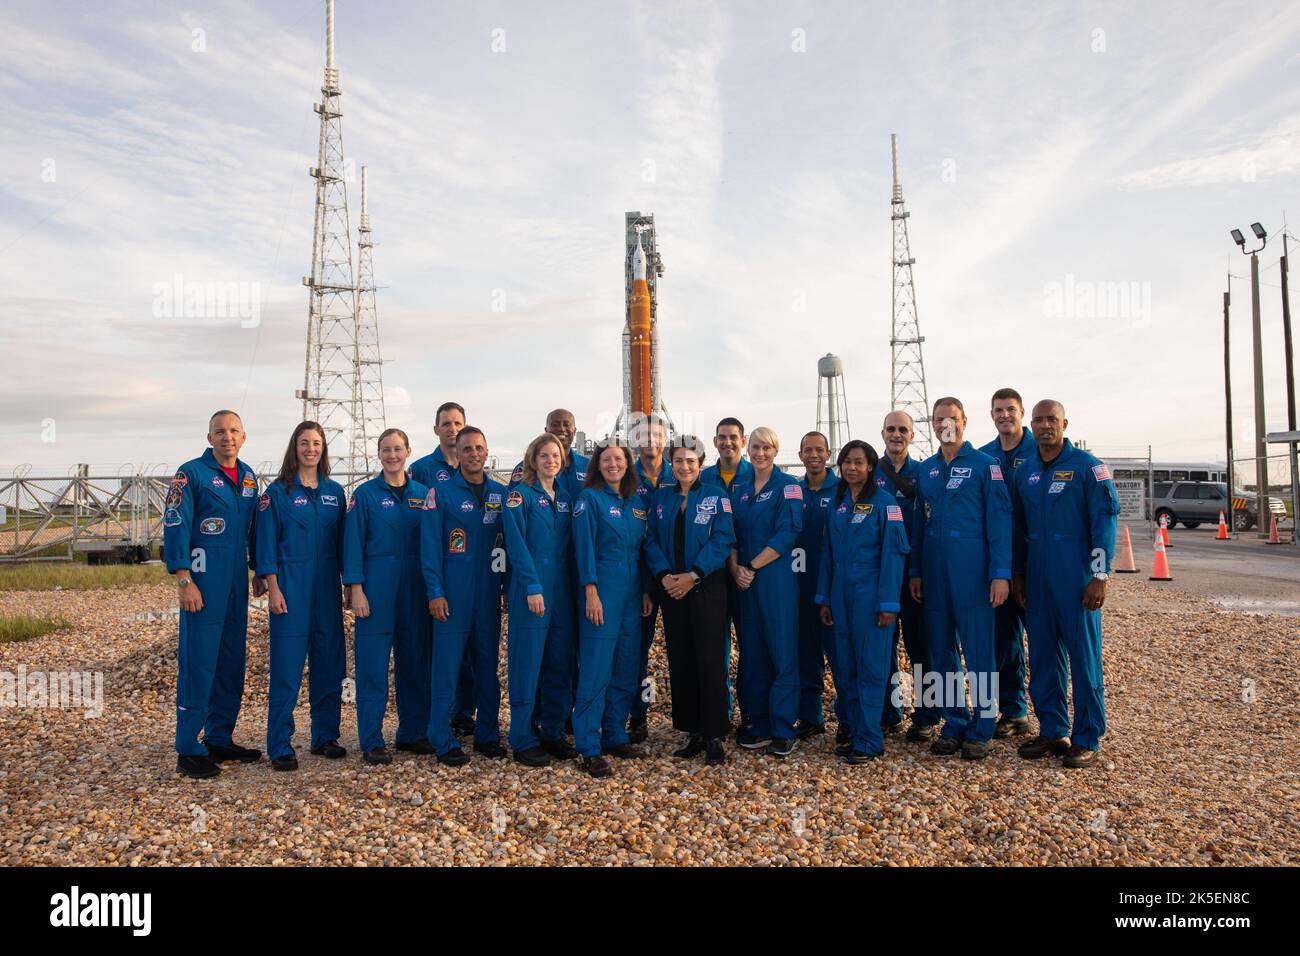 Astronauts and astronaut candidates from NASA and the Canadian Space Agency pose for a photograph in front of NASA’s Artemis I Space Launch System and Orion spacecraft atop the mobile launcher on the pad at Launch Complex 39B on Aug. 28, 2022. The astronauts are, from left to right: Randy Bresnik, NASA astronaut; Christina Birch, NASA astronaut candidate; Jessica Wittner, NASA astronaut candidate; Joshua Kutryk, Canadian Space Agency astronaut; Joe Acaba, NASA astronaut; Zena Cardman, NASA astronaut; Andre Douglas, NASA astronaut candidate; Shannon Walker, NASA astronaut; Reid Wiseman, NASA as Stock Photo